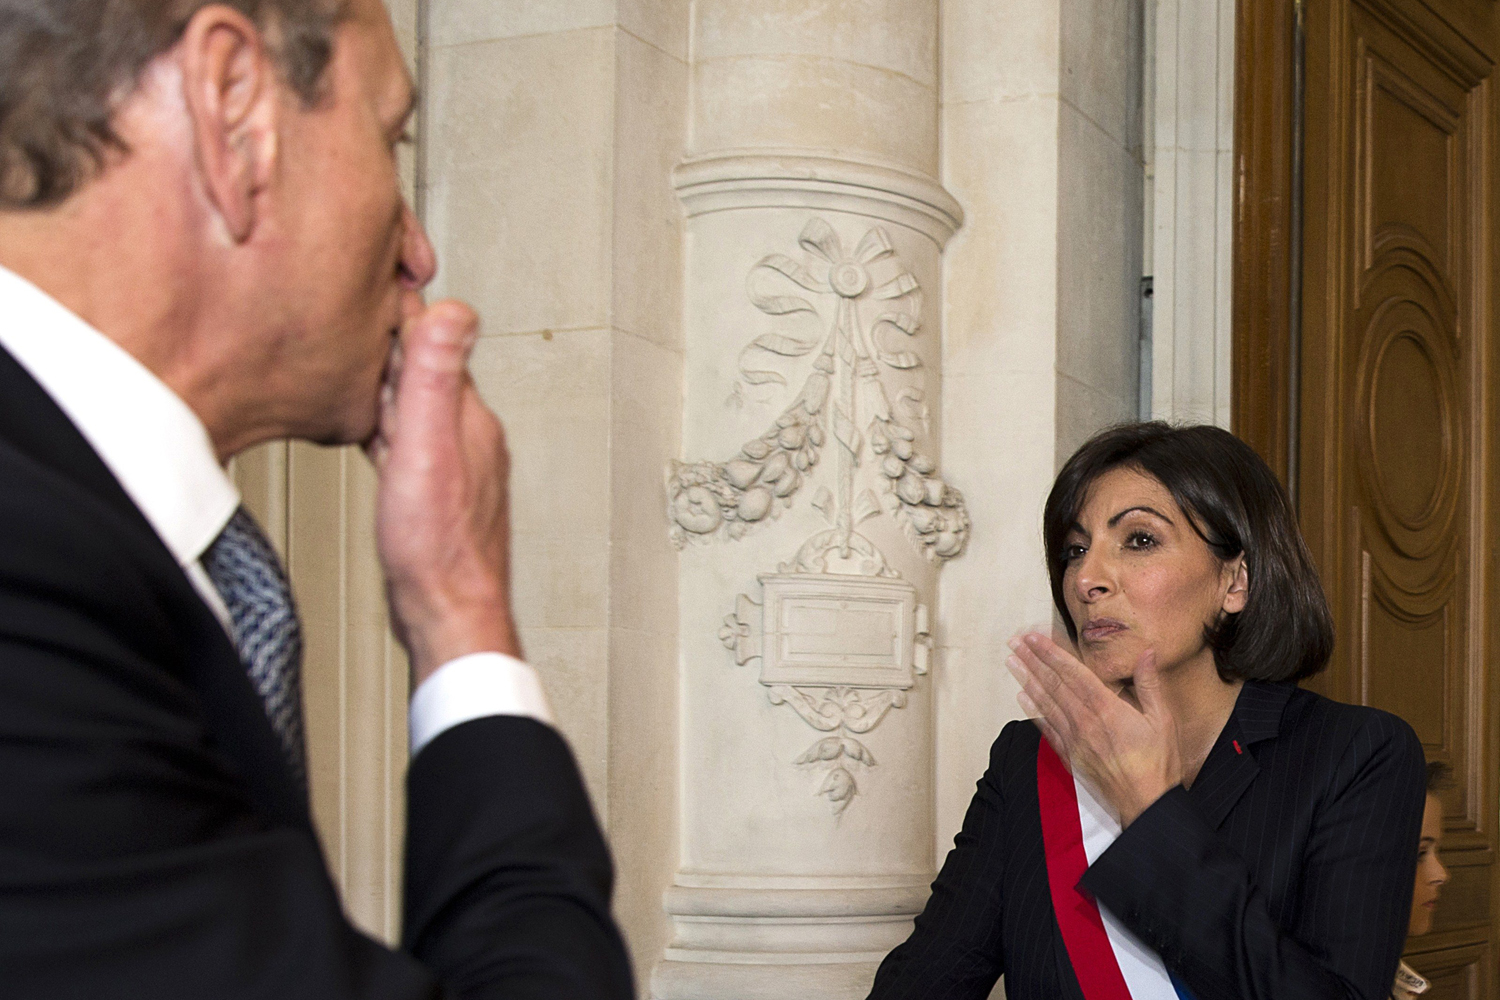 From right, The new mayor of Paris, socialist Anne Hidalgo, wearing her tricolour mayoral sash, and former mayor, socialist Bertrand Delanoe, blow a kiss to each other as Delanoe leaves the Paris city hall during the inaugural session of the newly elected council on April 5, 2014.